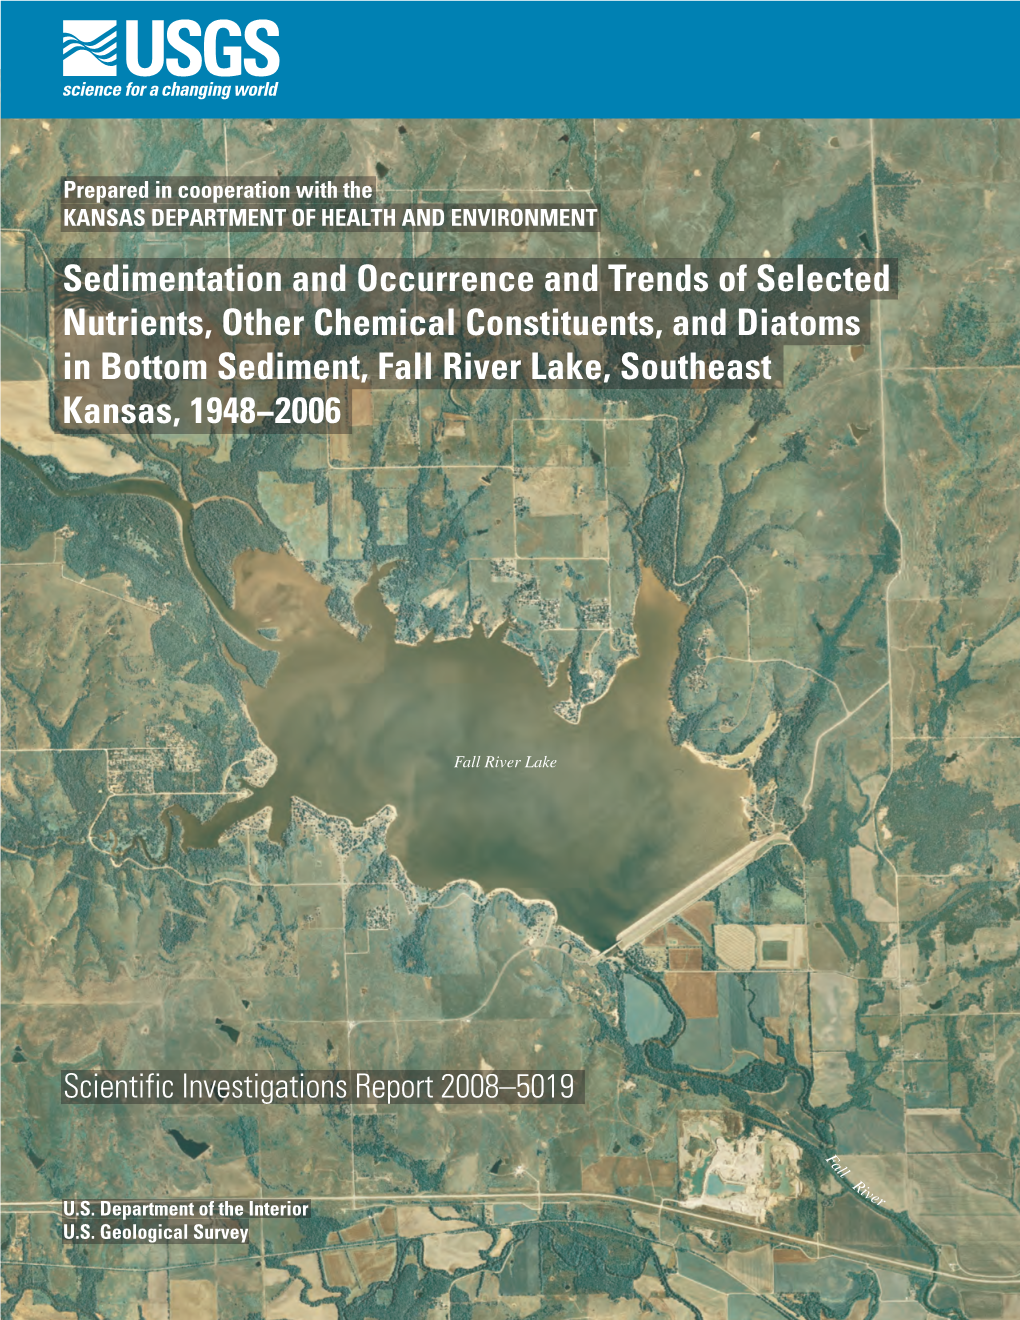 Sedimentation and Occurrence and Trends of Selected Nutrients, Other Chemical Constituents, and Diatoms in Bottom Sediment, Fall